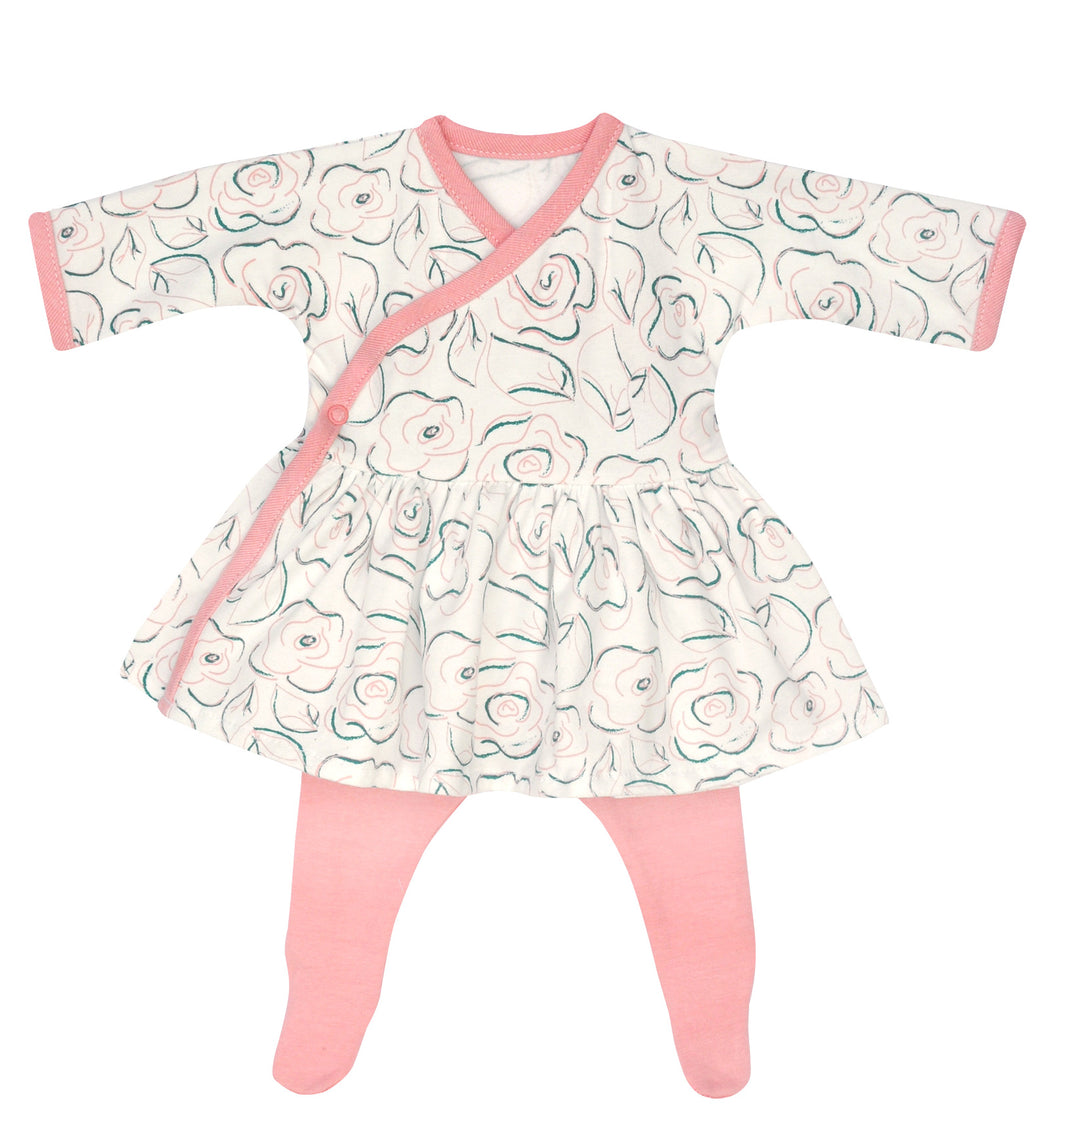 Preemie Girls Side Snap Dress With Matching Tights